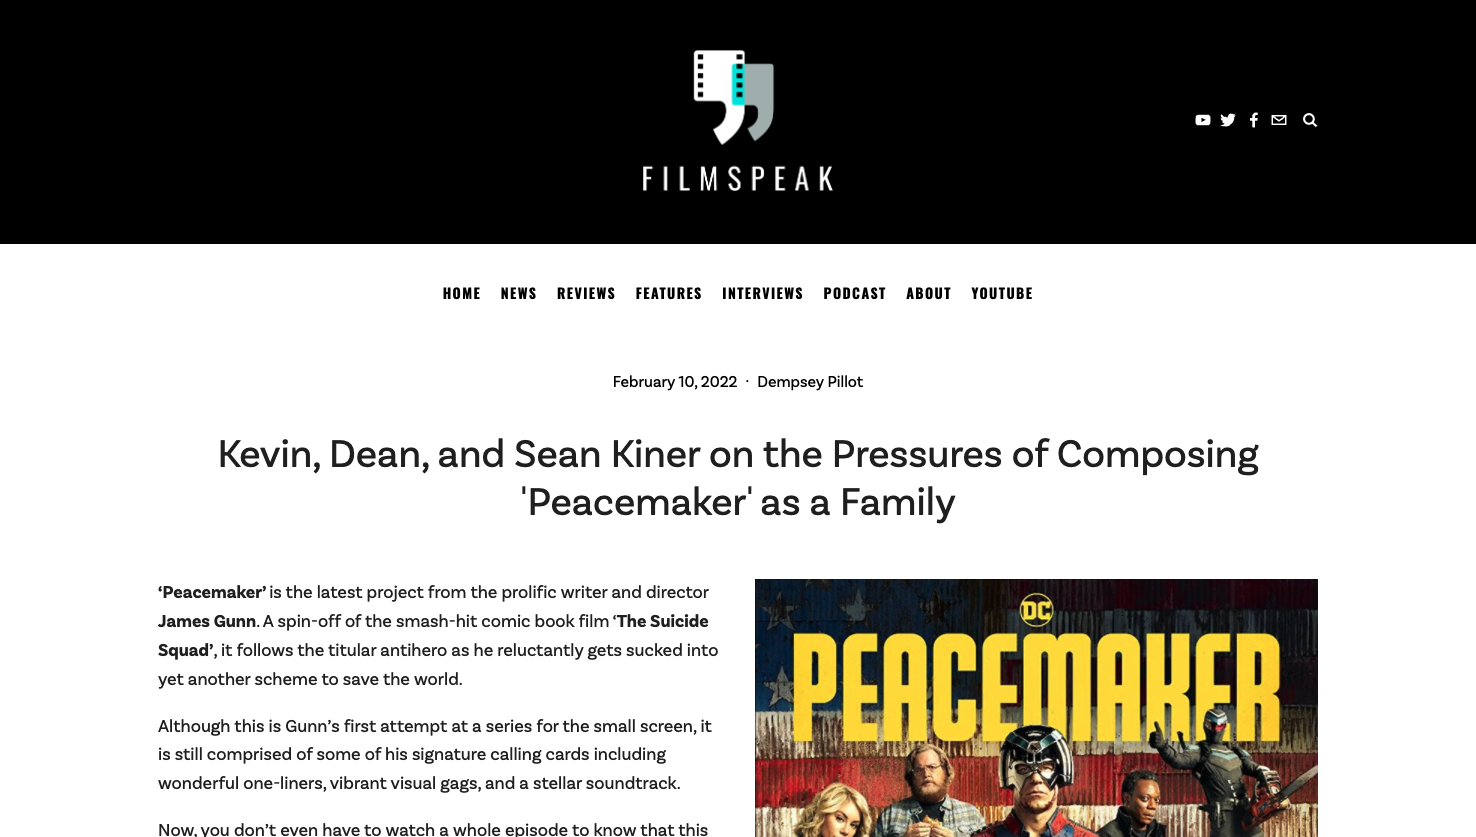 Kevin, Dean, and Sean Kiner on the Pressures of Composing ‘Peacemaker’ as a Family